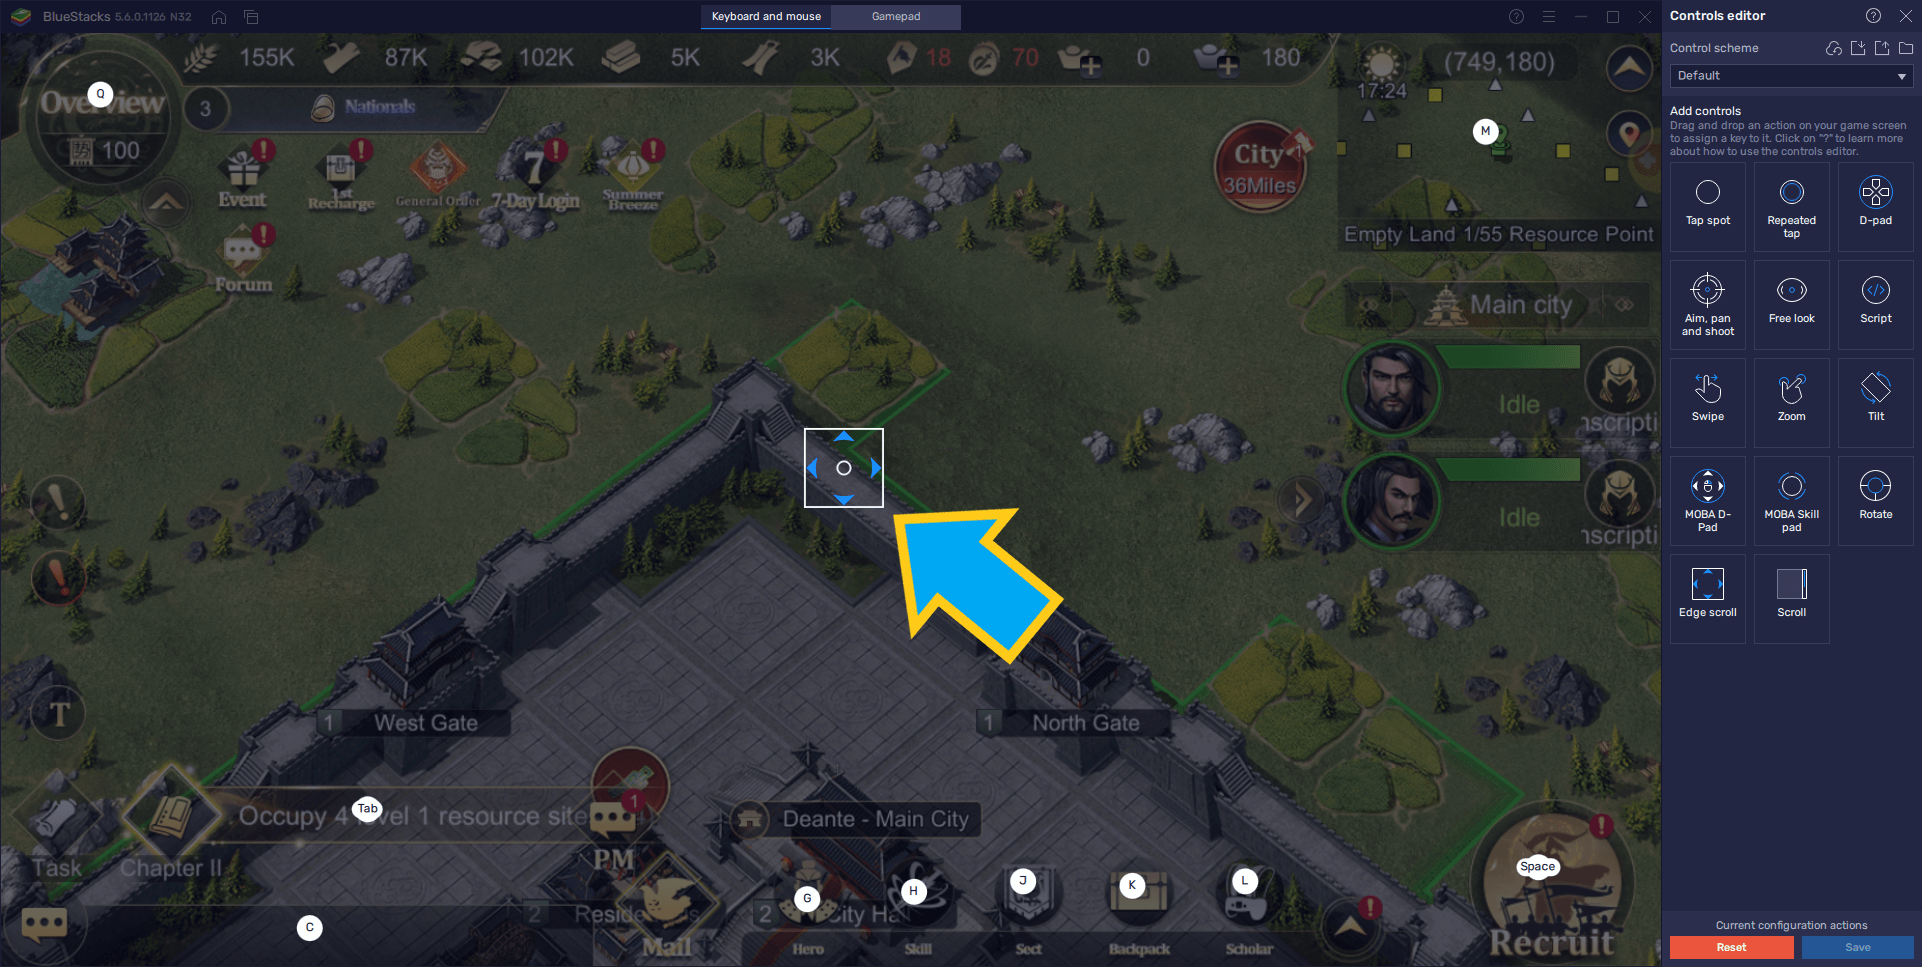 The Qin Empire on PC - How to Use BlueStacks to Develop Your Empire and Conquer Your Enemies